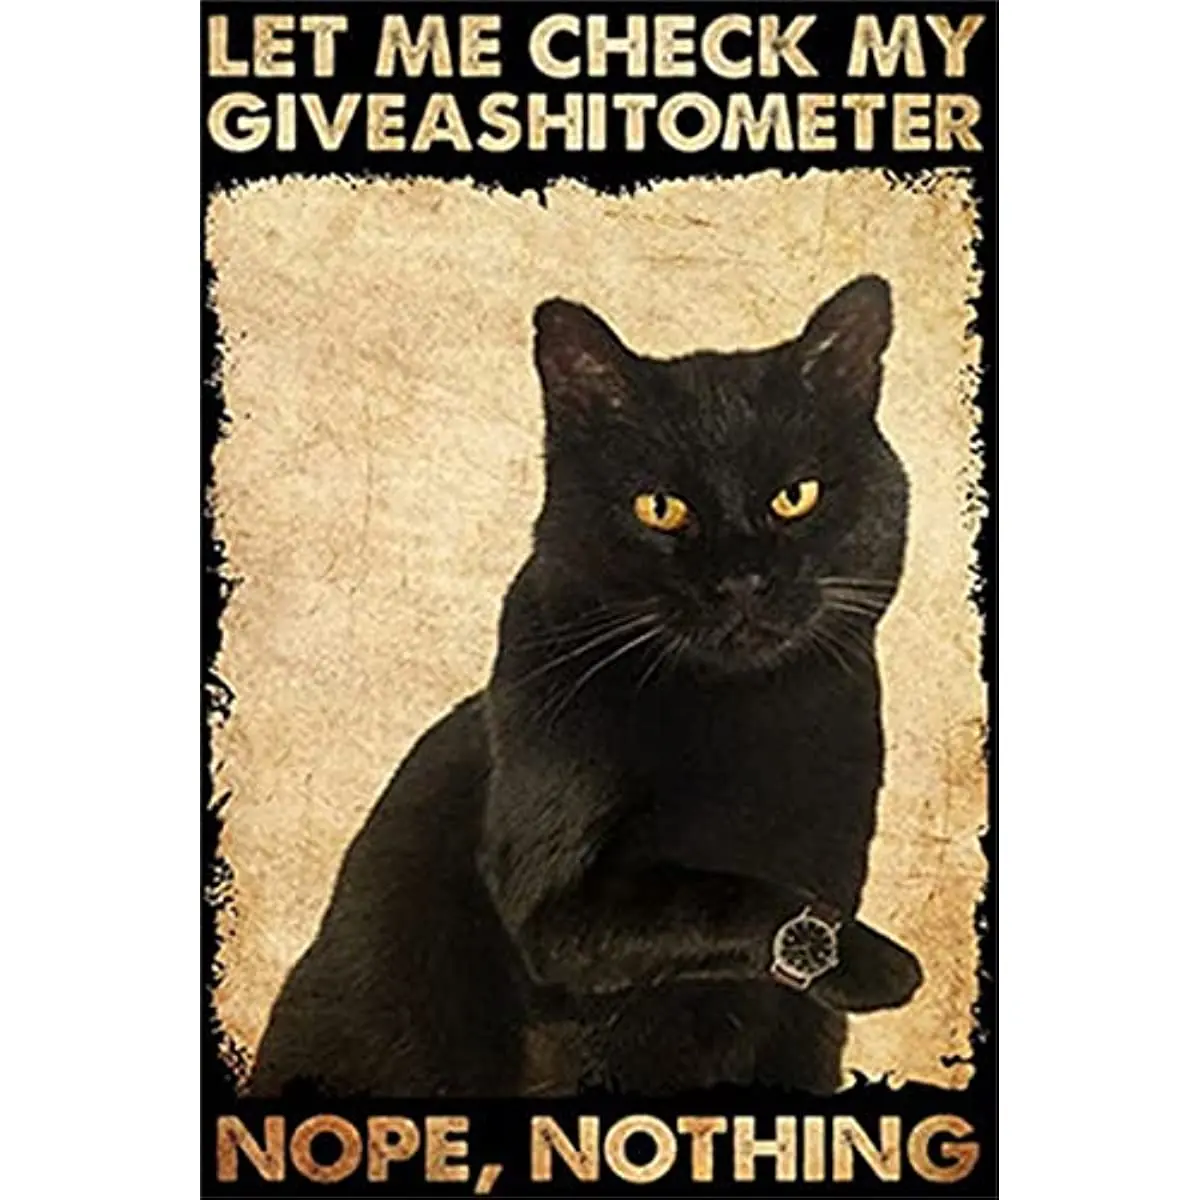 

Metal Aluminium Tin Sign Let Me Check My Giveashitometer Nope Nothing Vintage Wall Metal Plaque Black Cat poster, 8x12inch